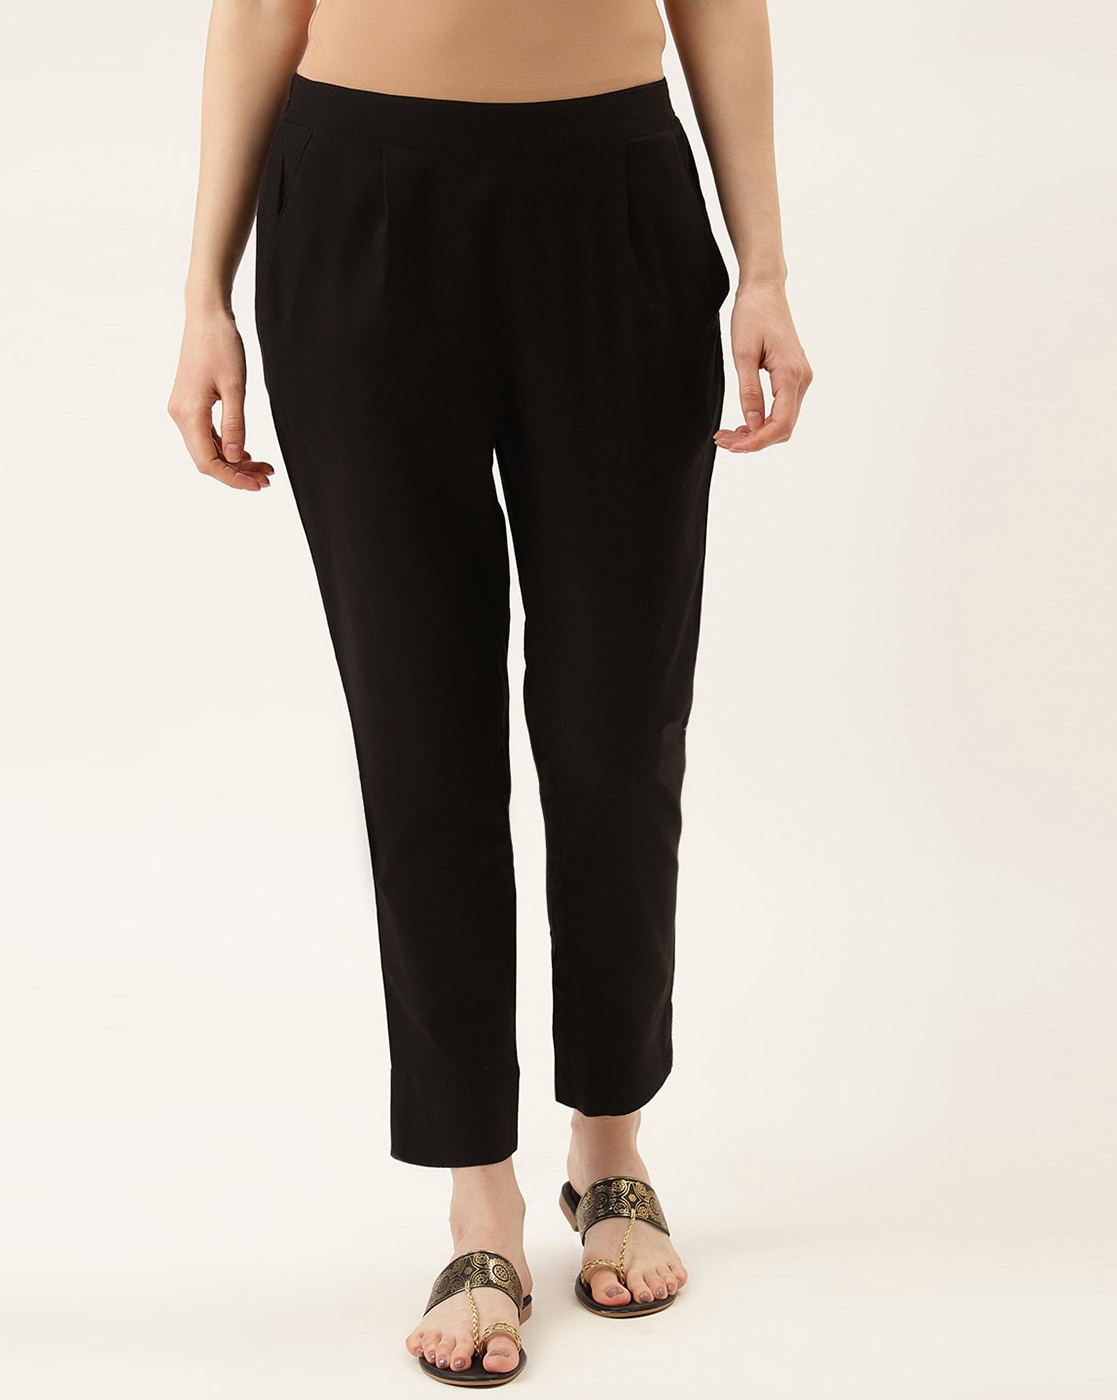 Weekday Daisy low rise trousers with front seam in black  ASOS